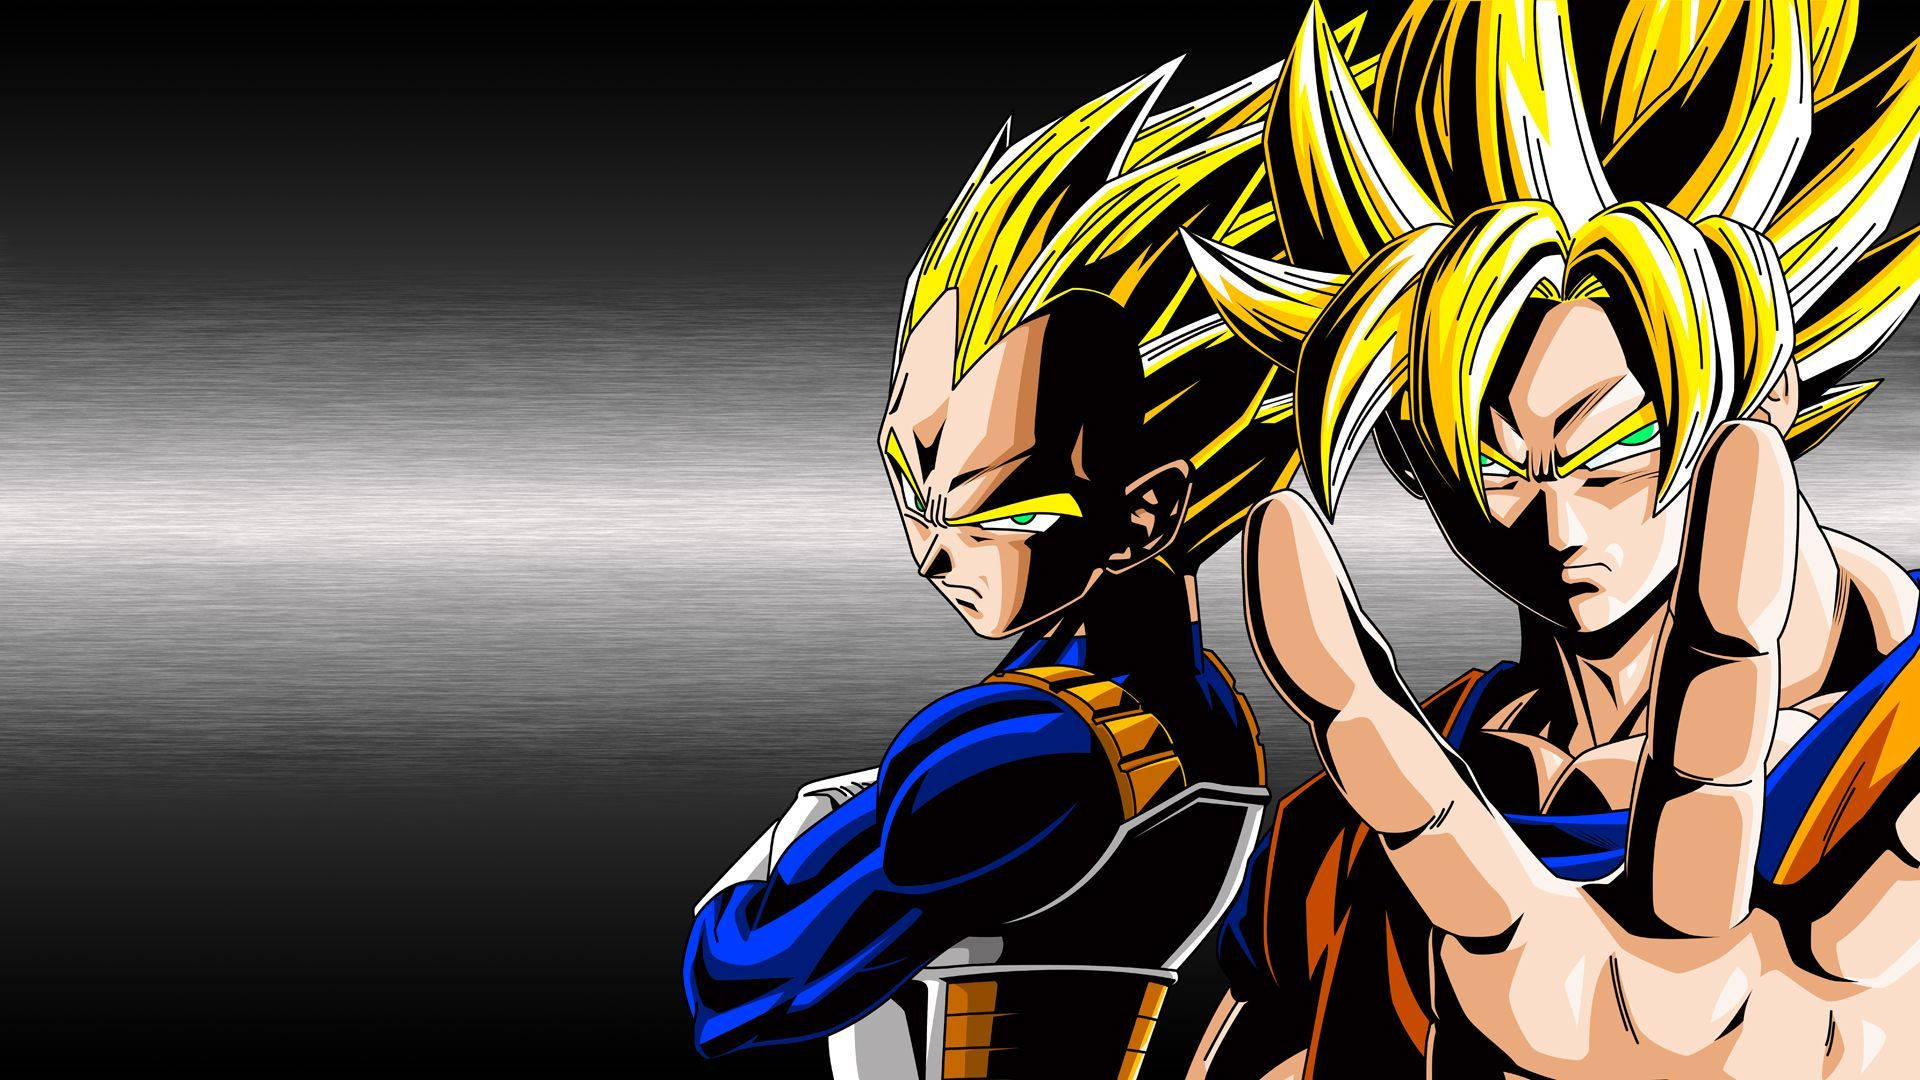 Top 15 DBZ Best Wallpapers of All Time  GAMERS DECIDE